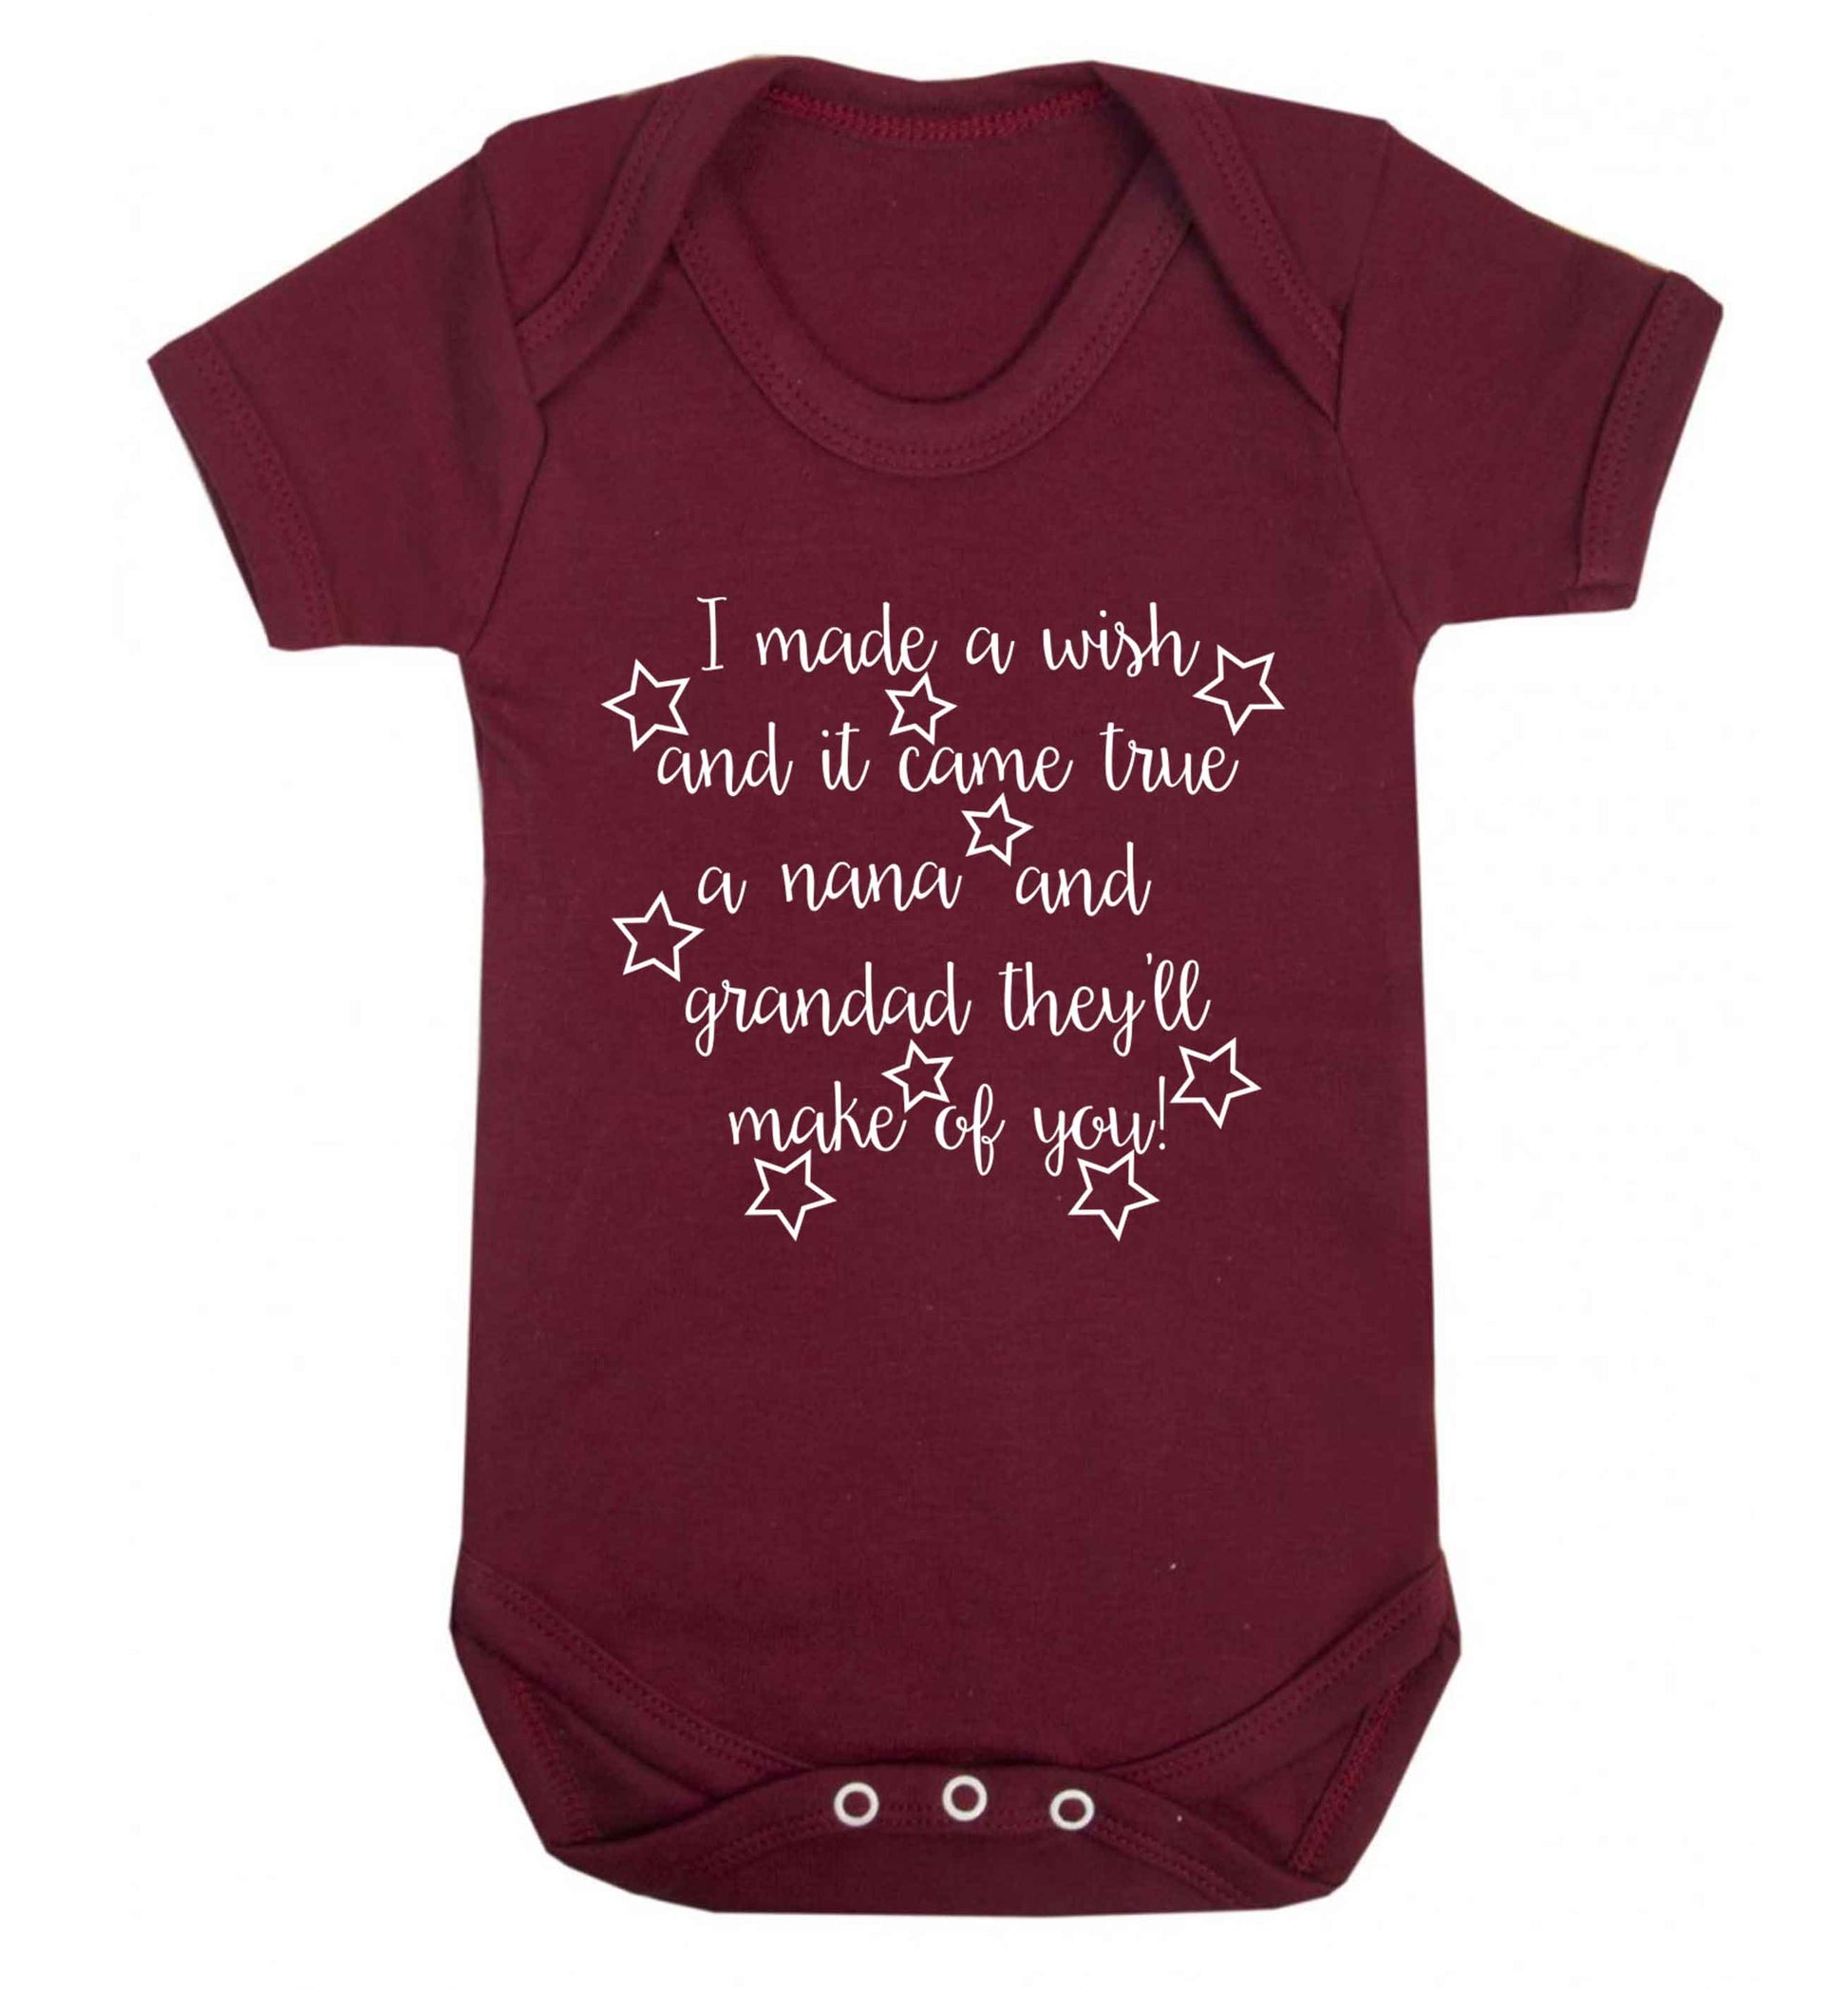 I made a wish and it came true a nana and grandad they'll make of you! Baby Vest maroon 18-24 months